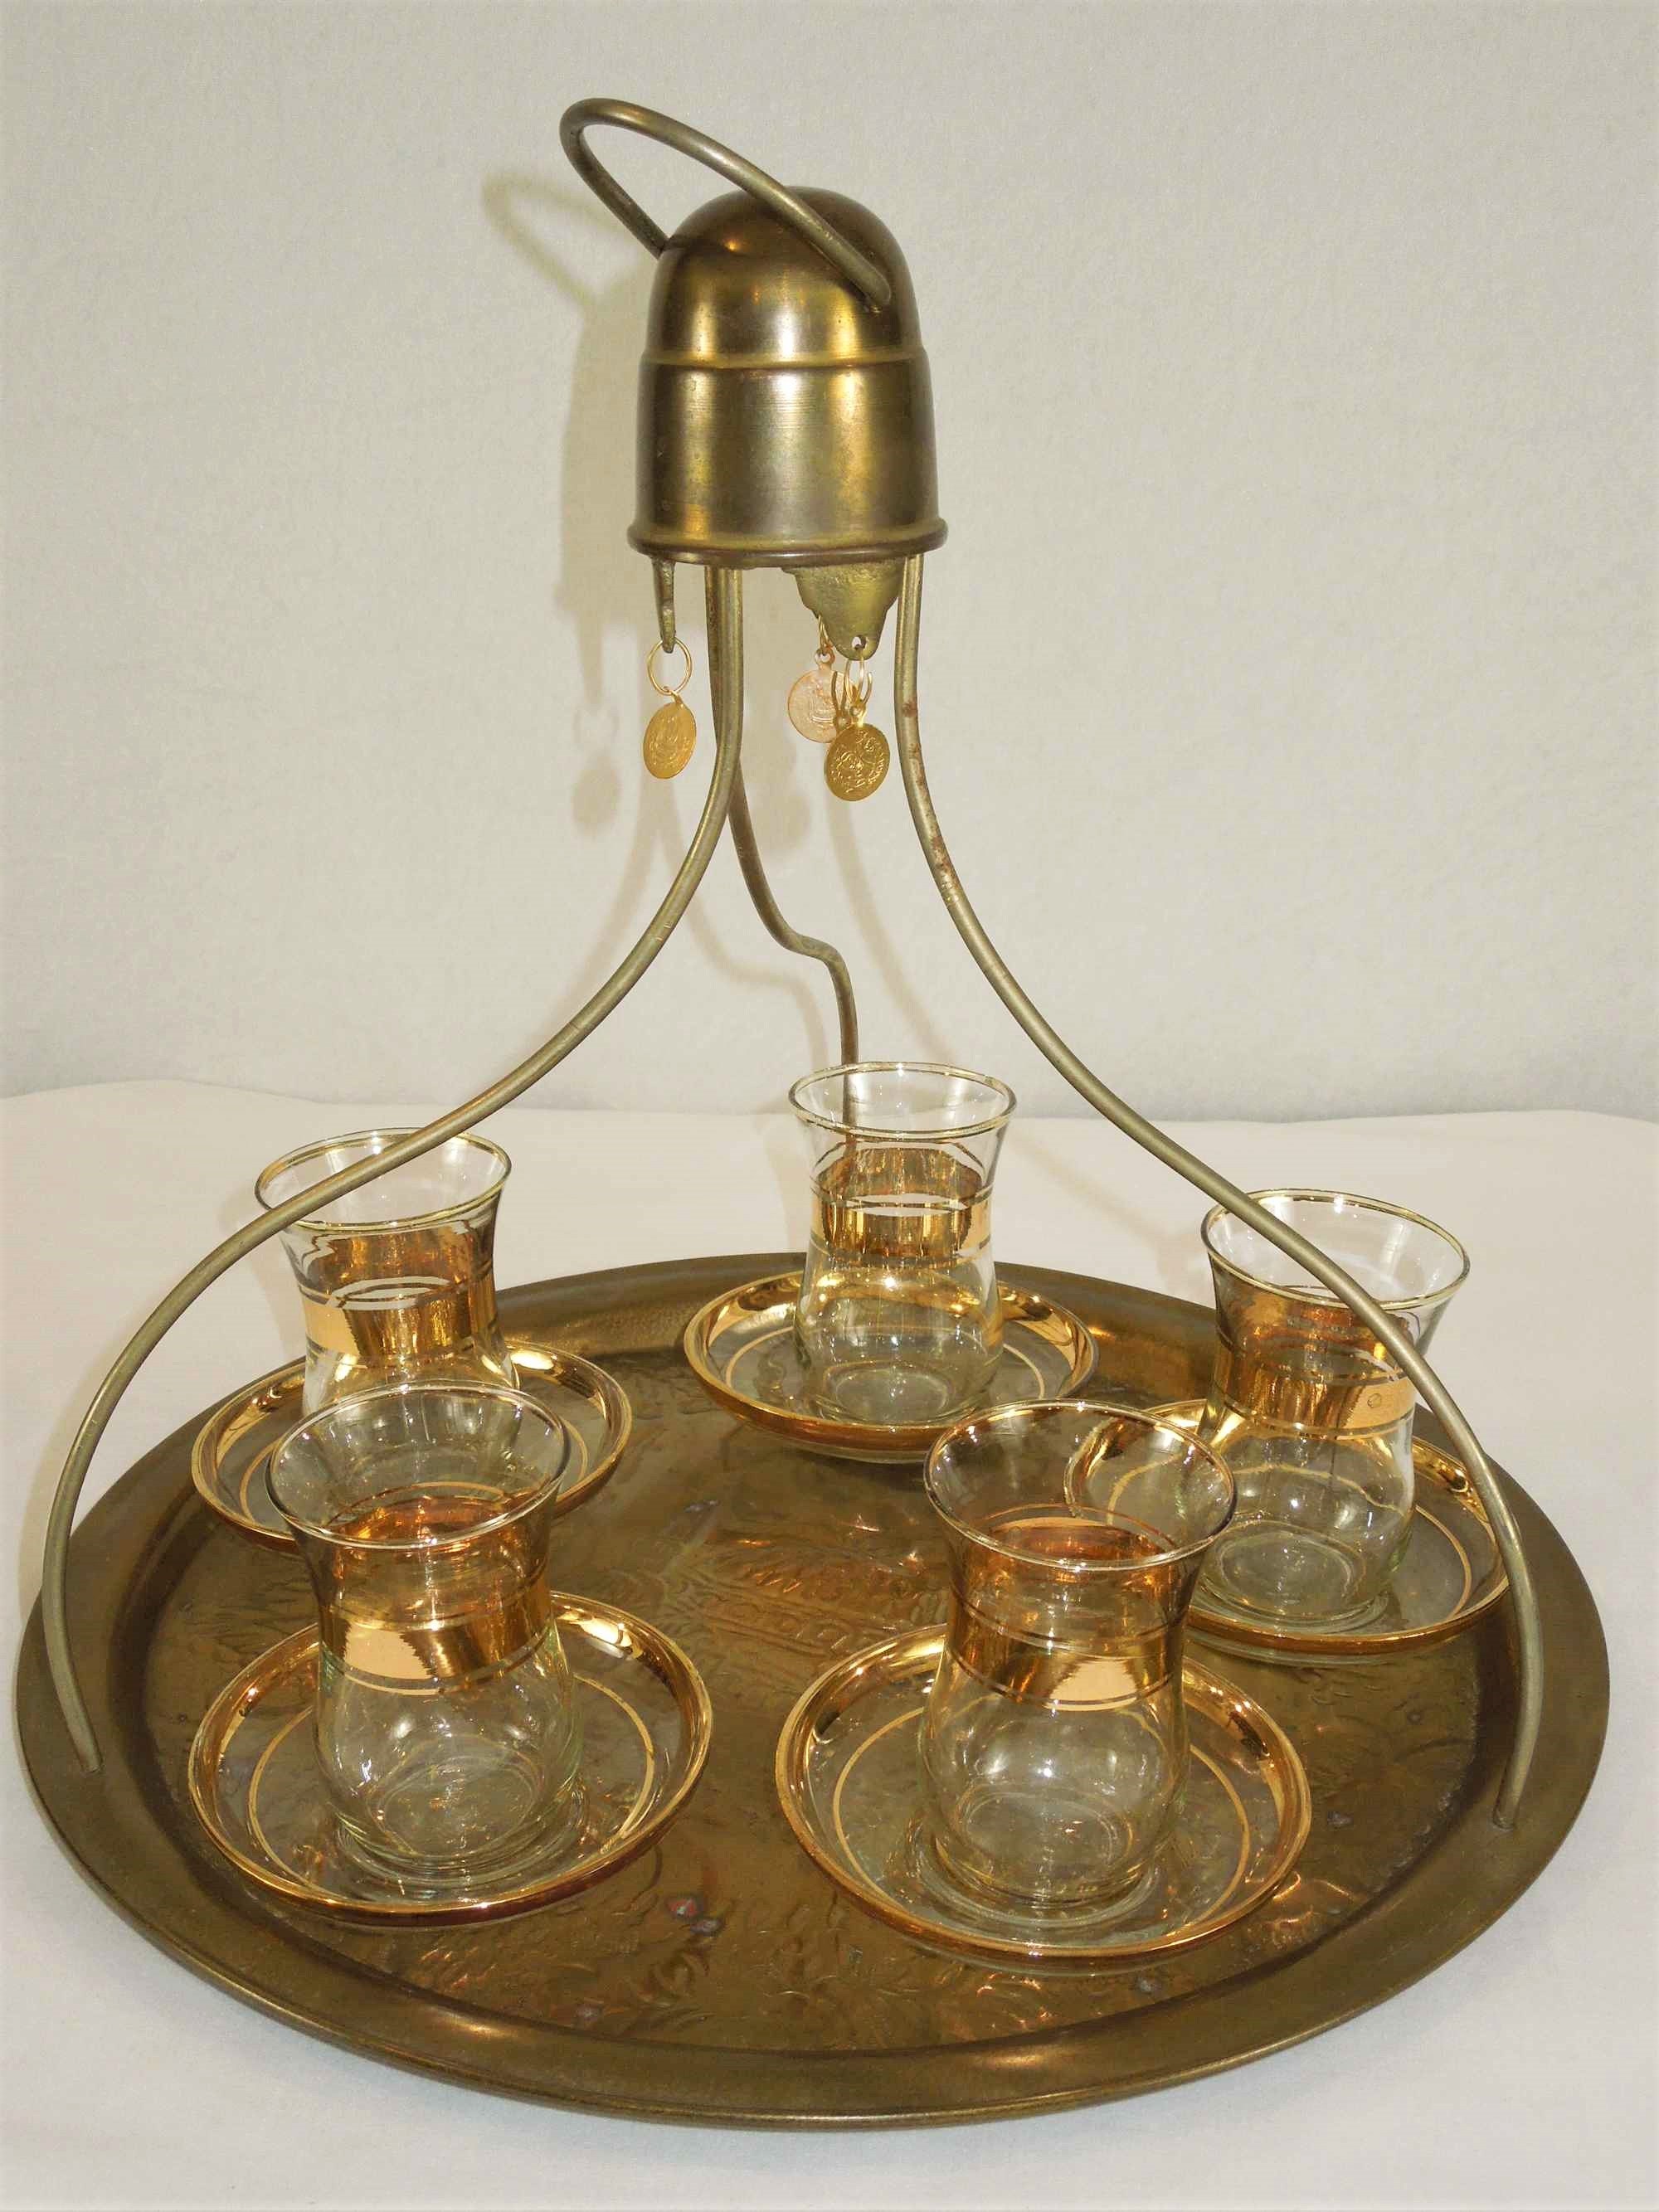 Vintage Turkish Tea Set. Tray With Saucers and Glasses. Brass Etsy